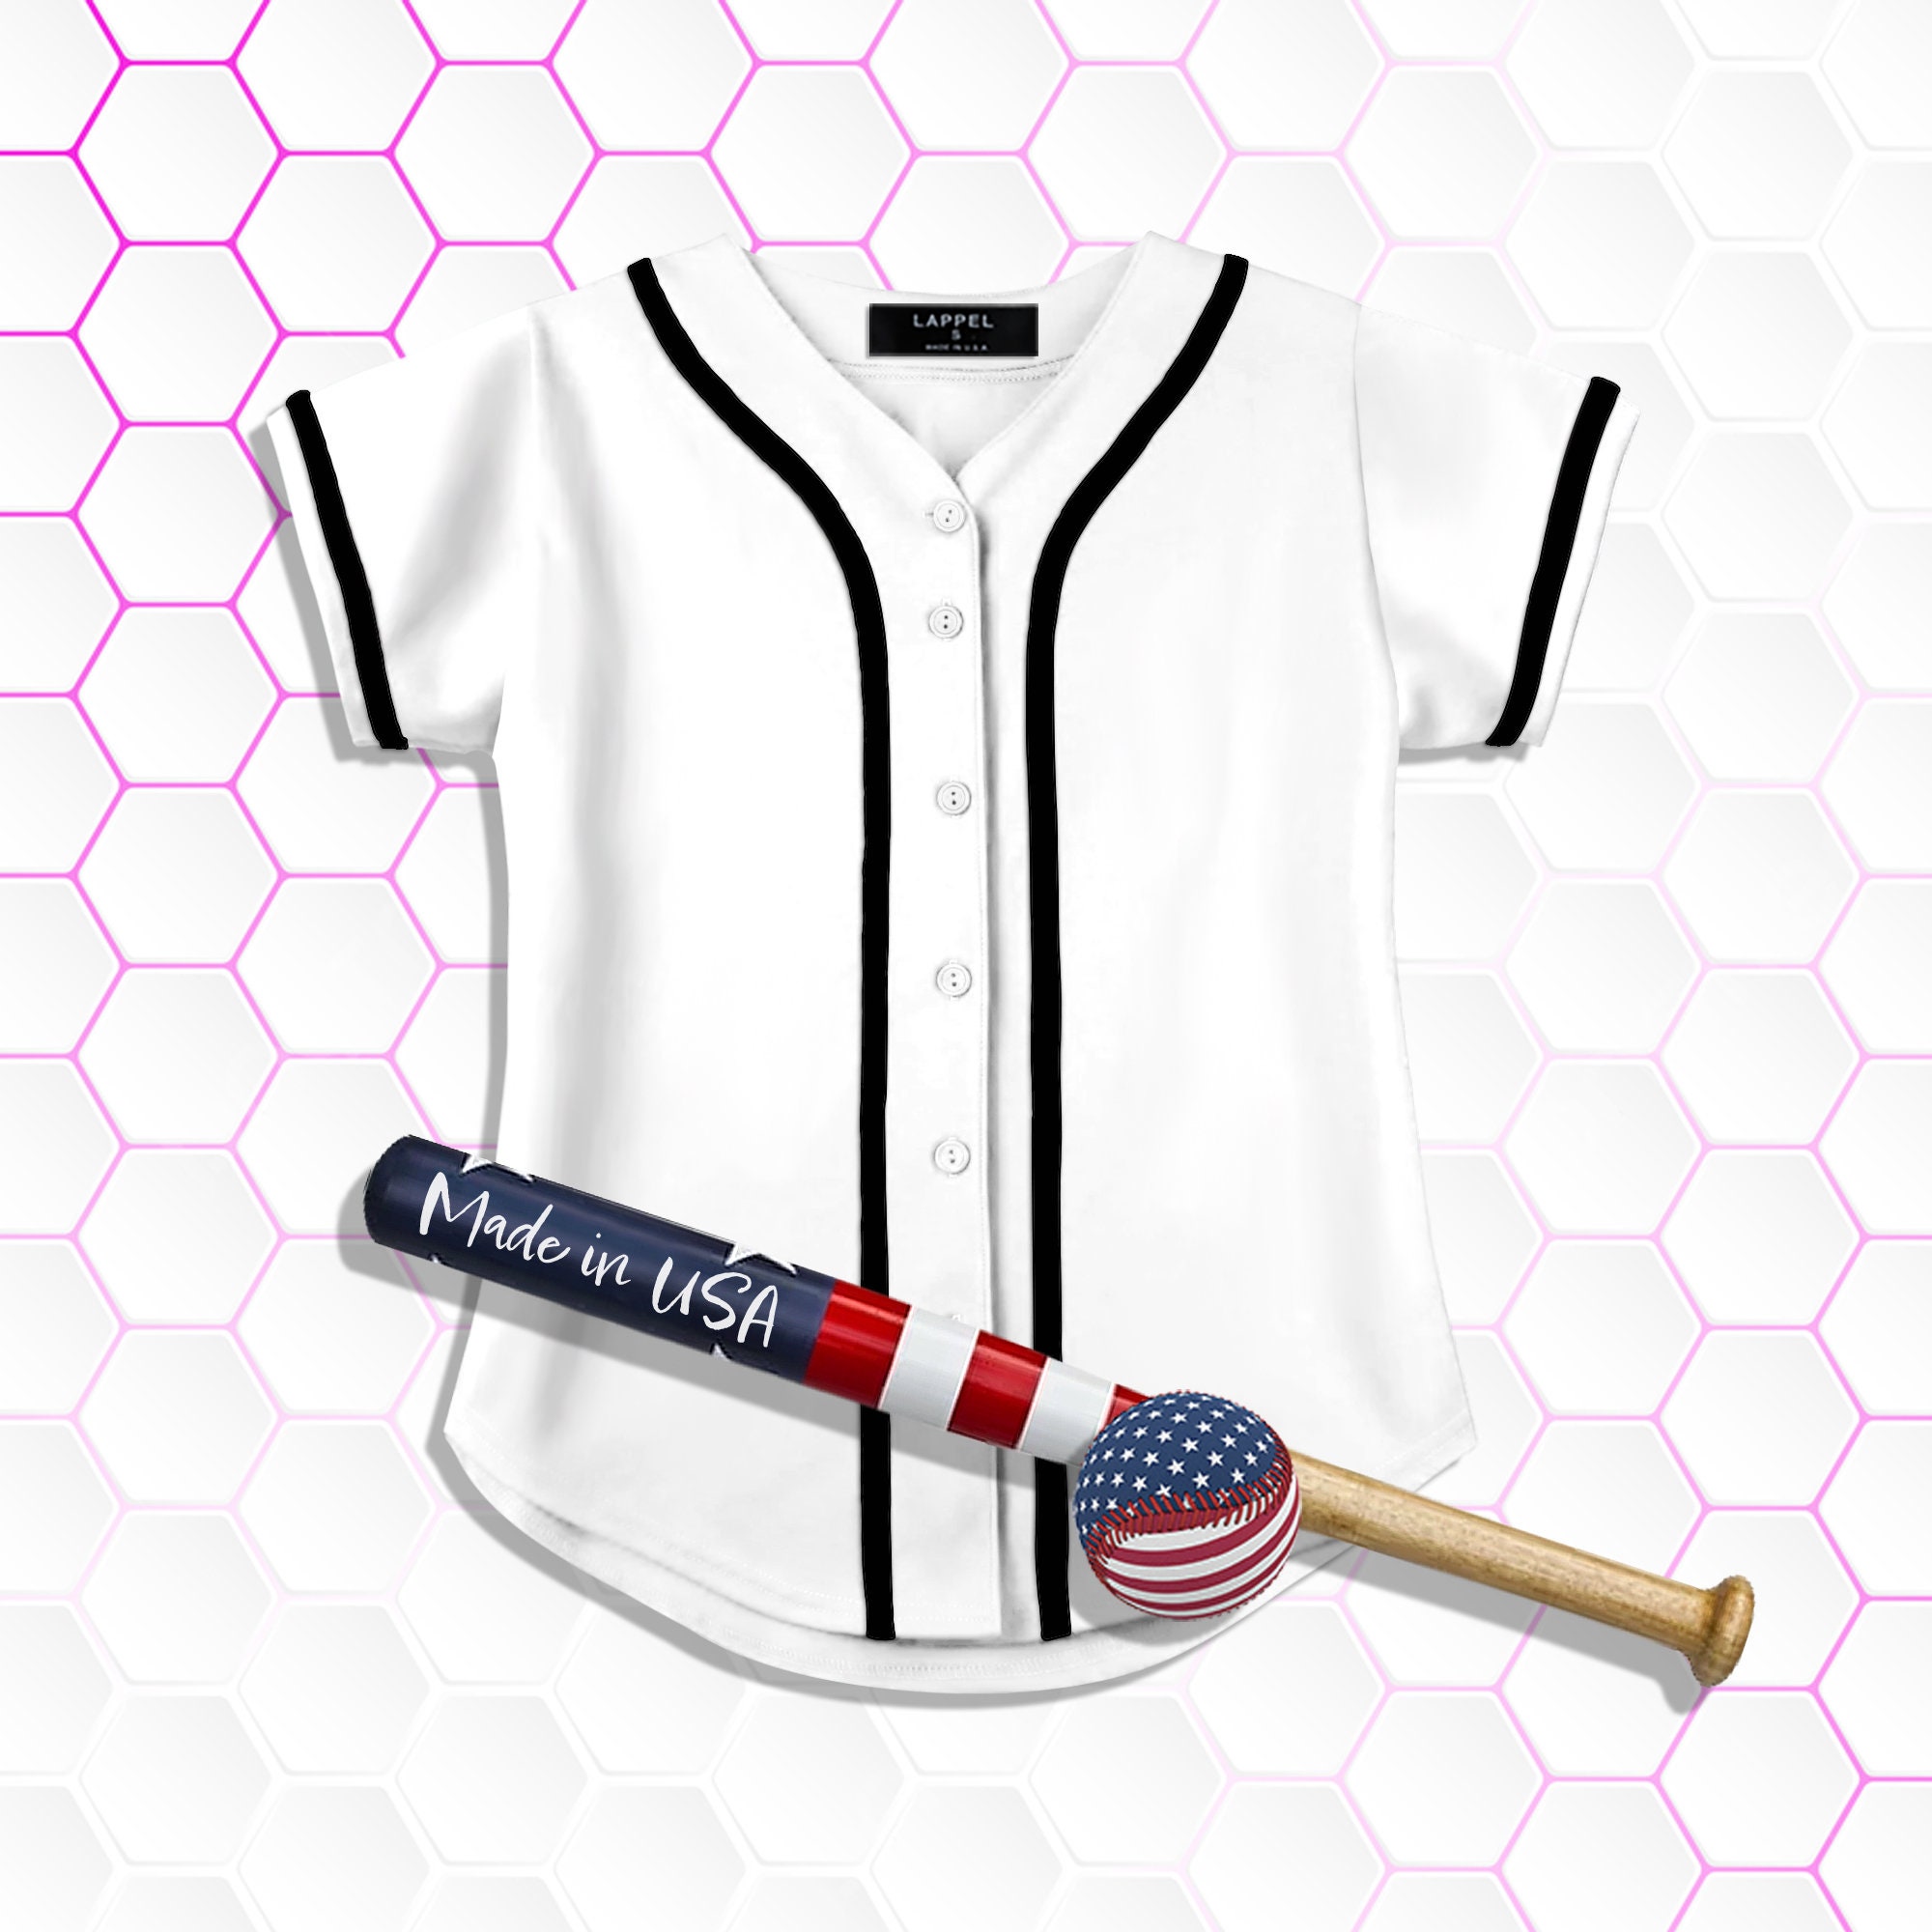 Discover Women's Baseball Button Down Jersey College Sports Team Uniforms Size S to 2XL Short Sleeve Athletic Sports Tee Shirts Made in USA